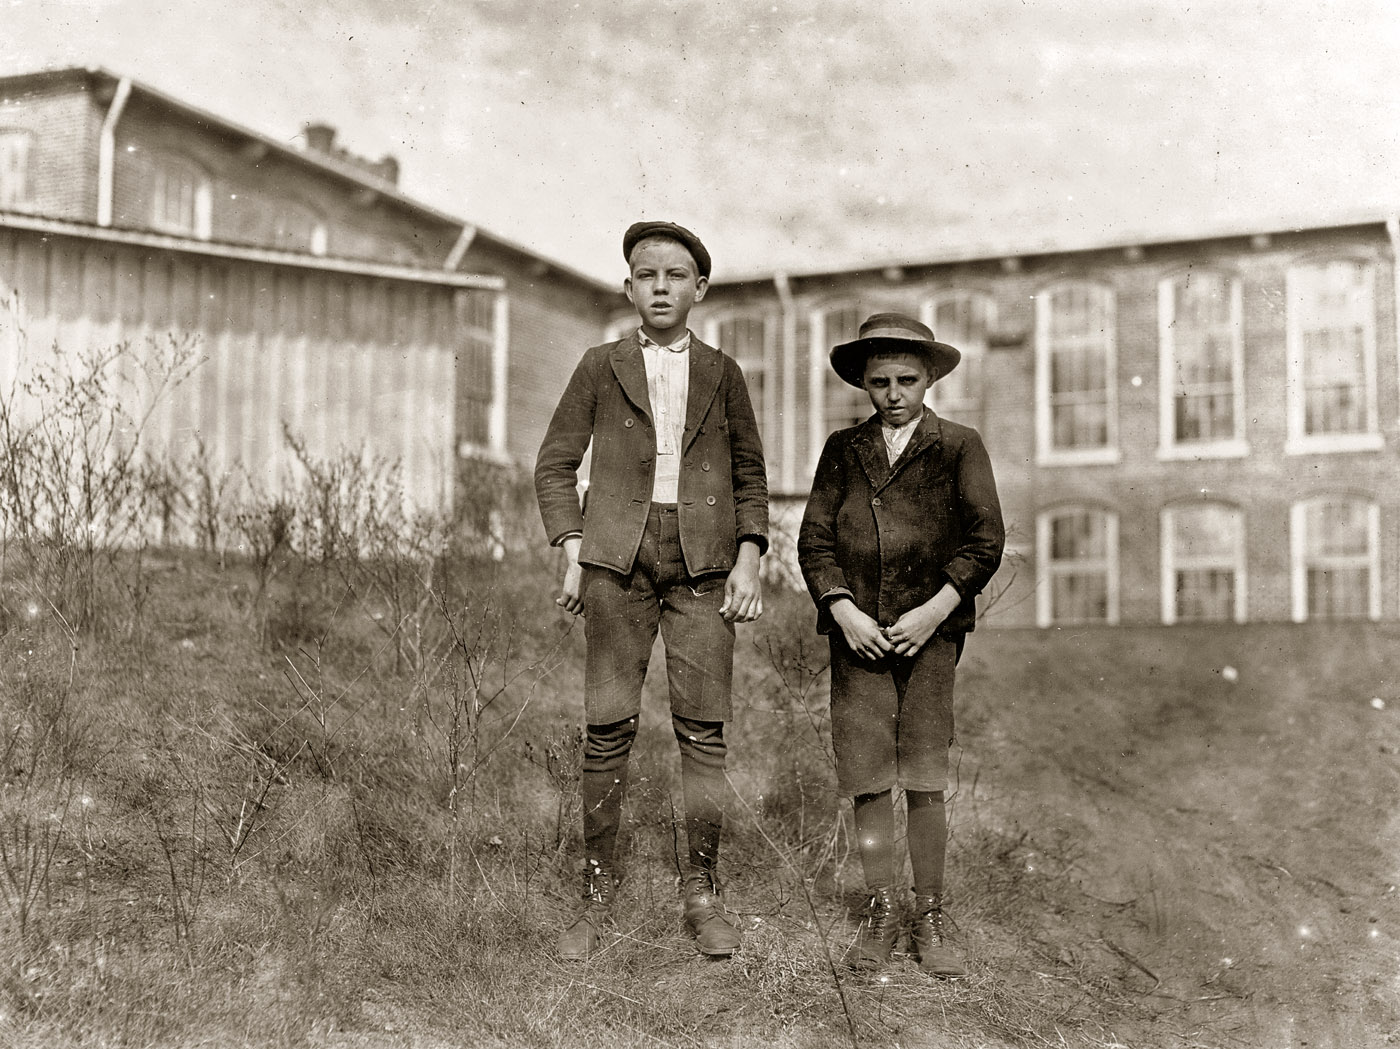 November 1908. Chester, South Carolina. Tommy Ashville (smaller boy), two years in Wylie Mill. "Specks I'm about 11." Arthur Shelly, eight years in mill, 14 years old. Other boys agreed he had been in mill eight years. Photograph and caption by Lewis Wickes Hine. View full size.